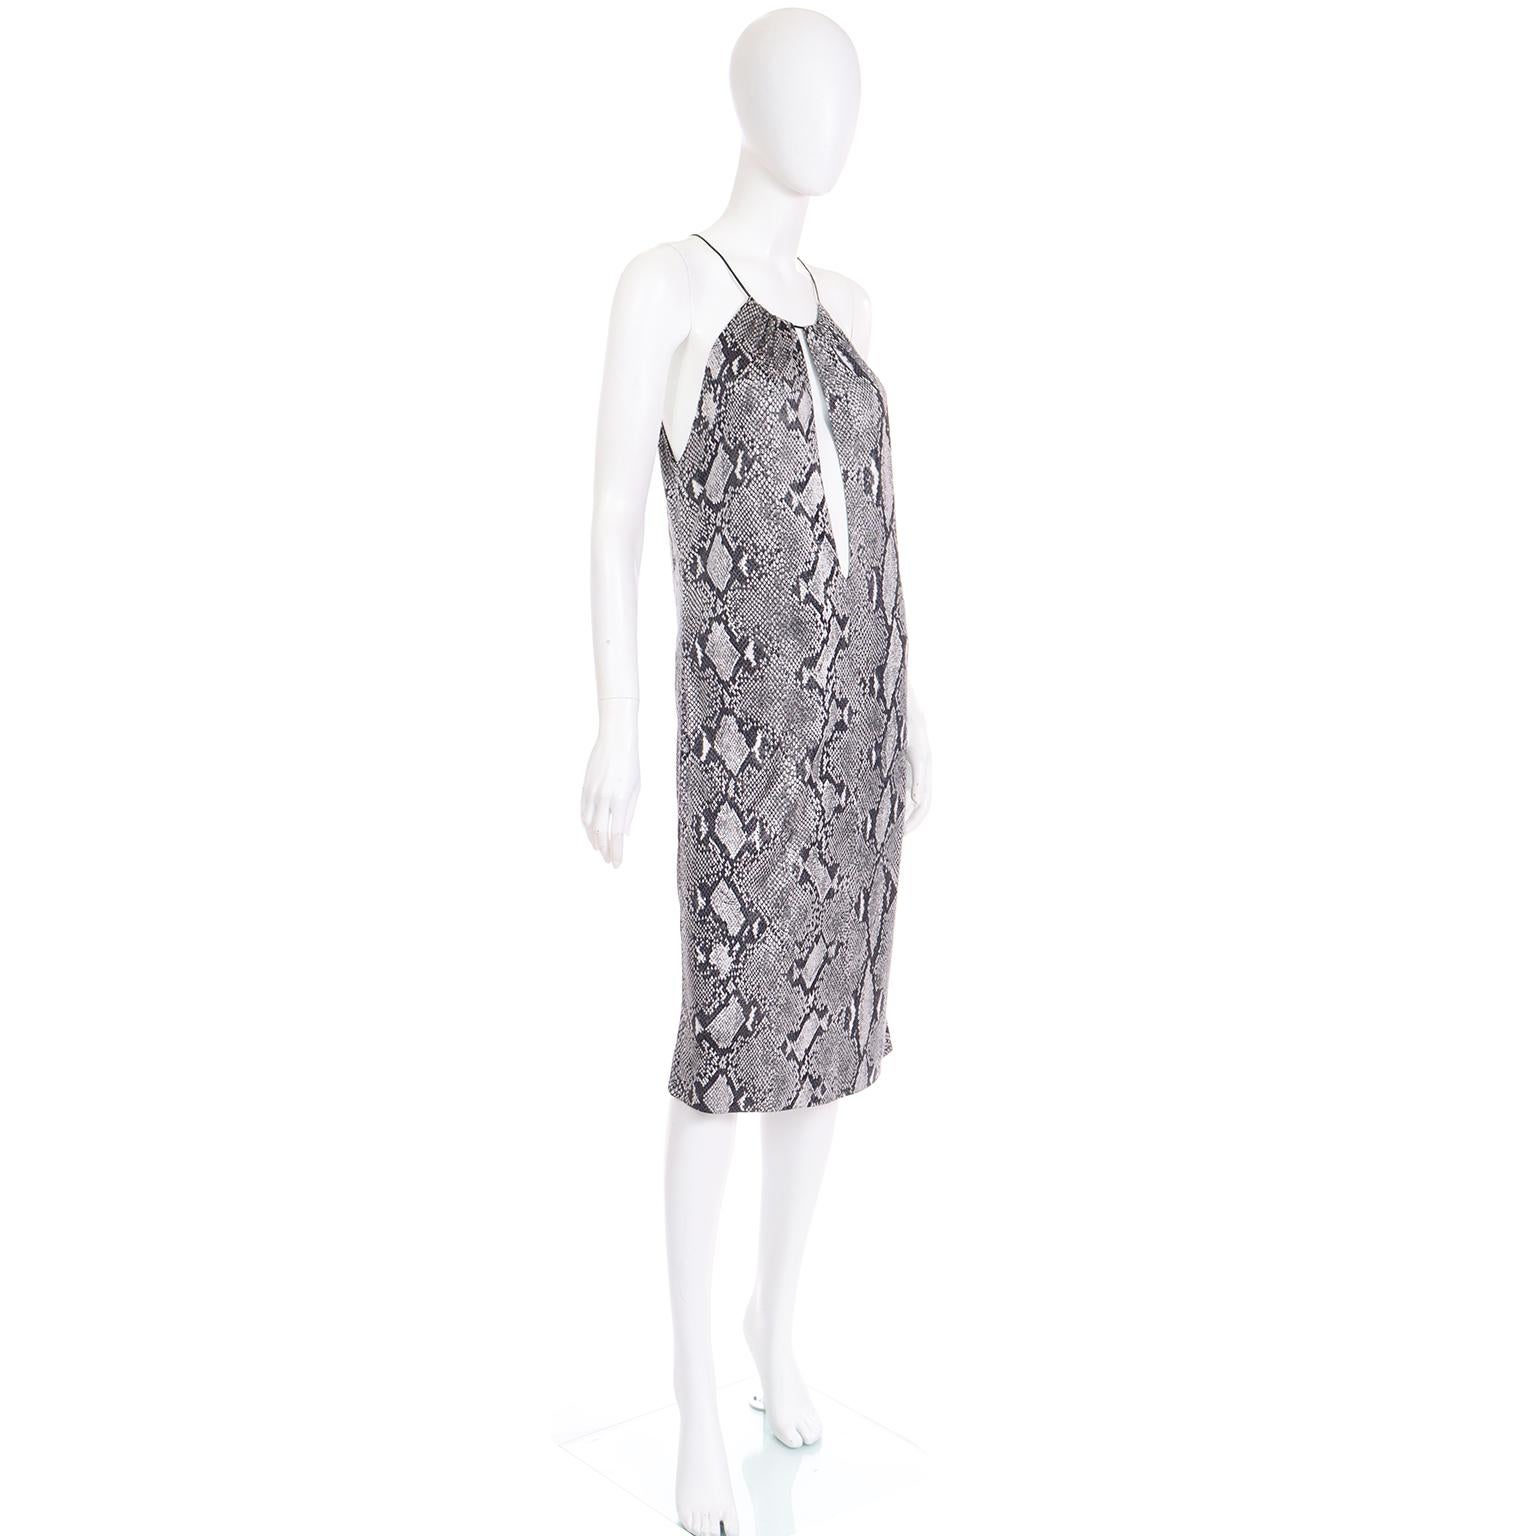 Tom Ford For Gucci S/S 2000 Runway Python Print Rayon Dress w Plunging V In Excellent Condition For Sale In Portland, OR